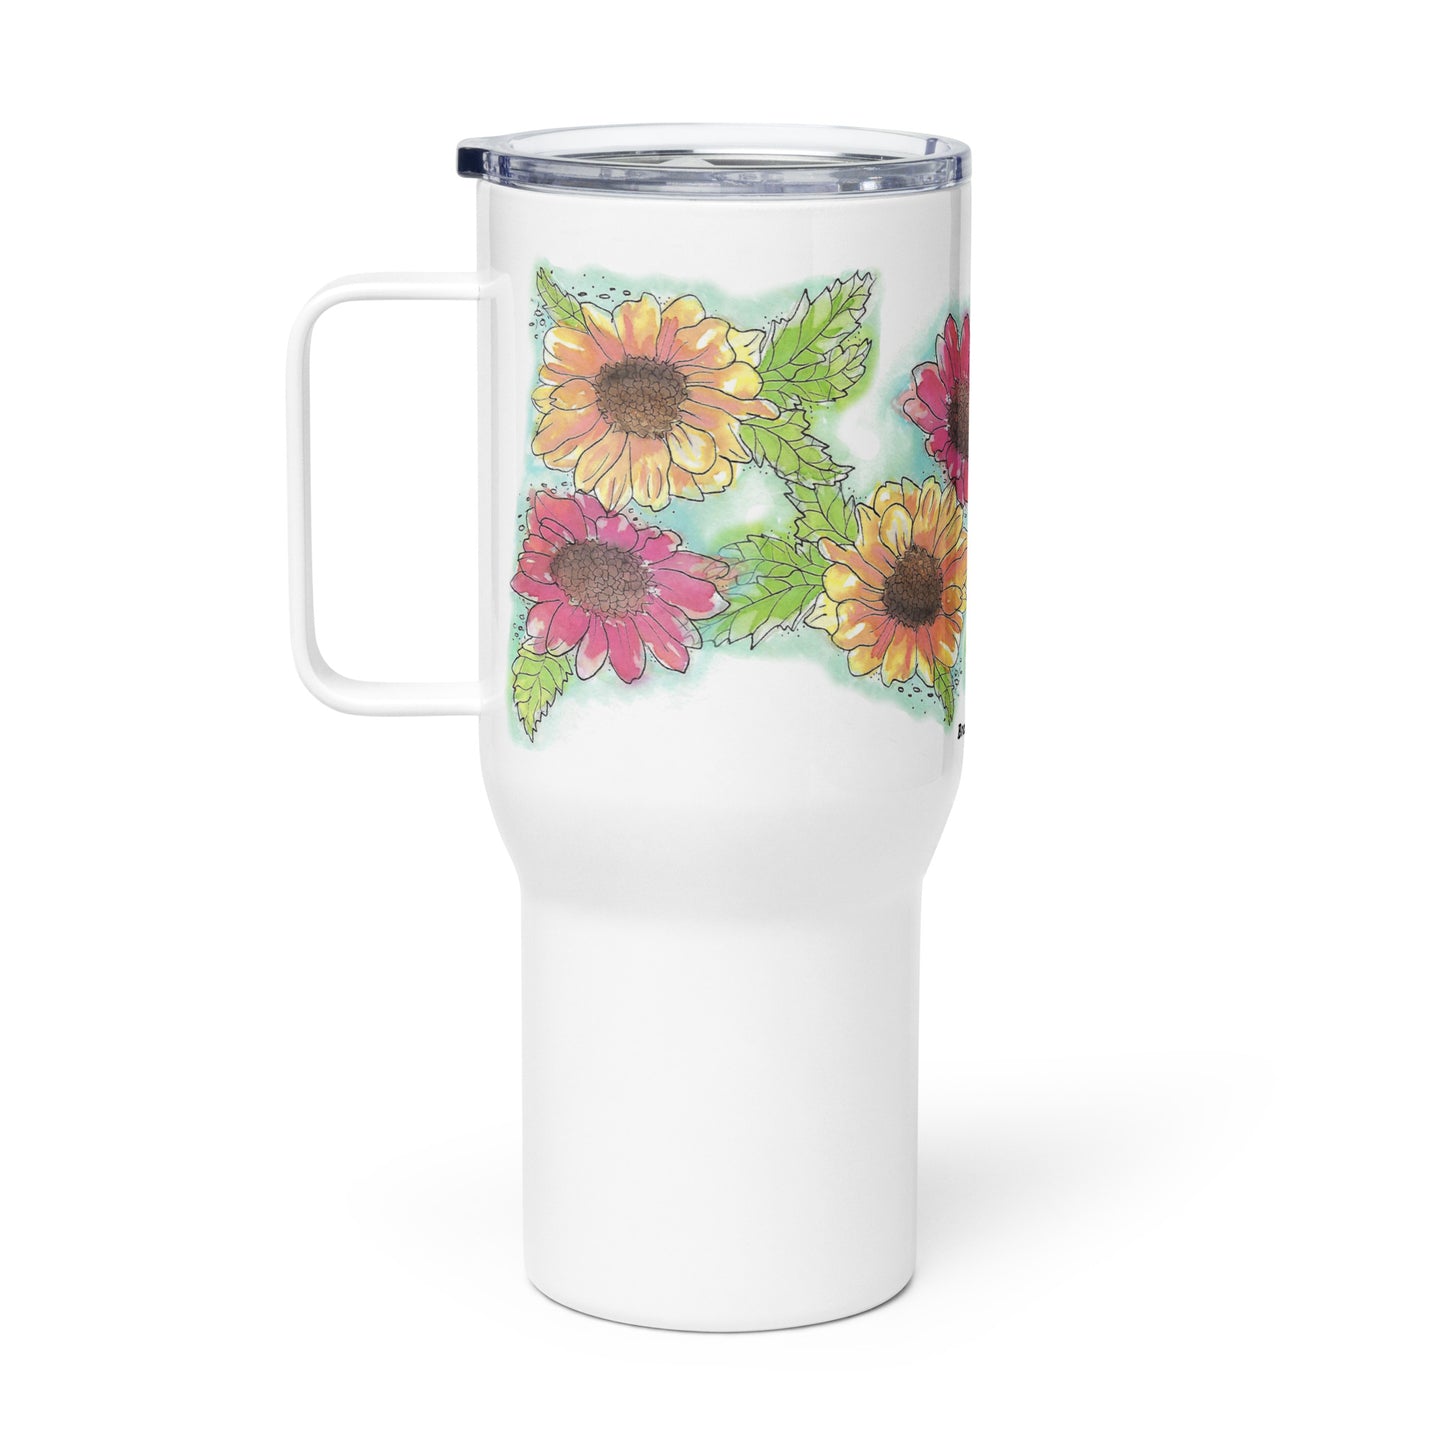 Gerber daisies stainless steel travel mug with handle. Holds 25 ounces and has a BPA-free plastic lid.